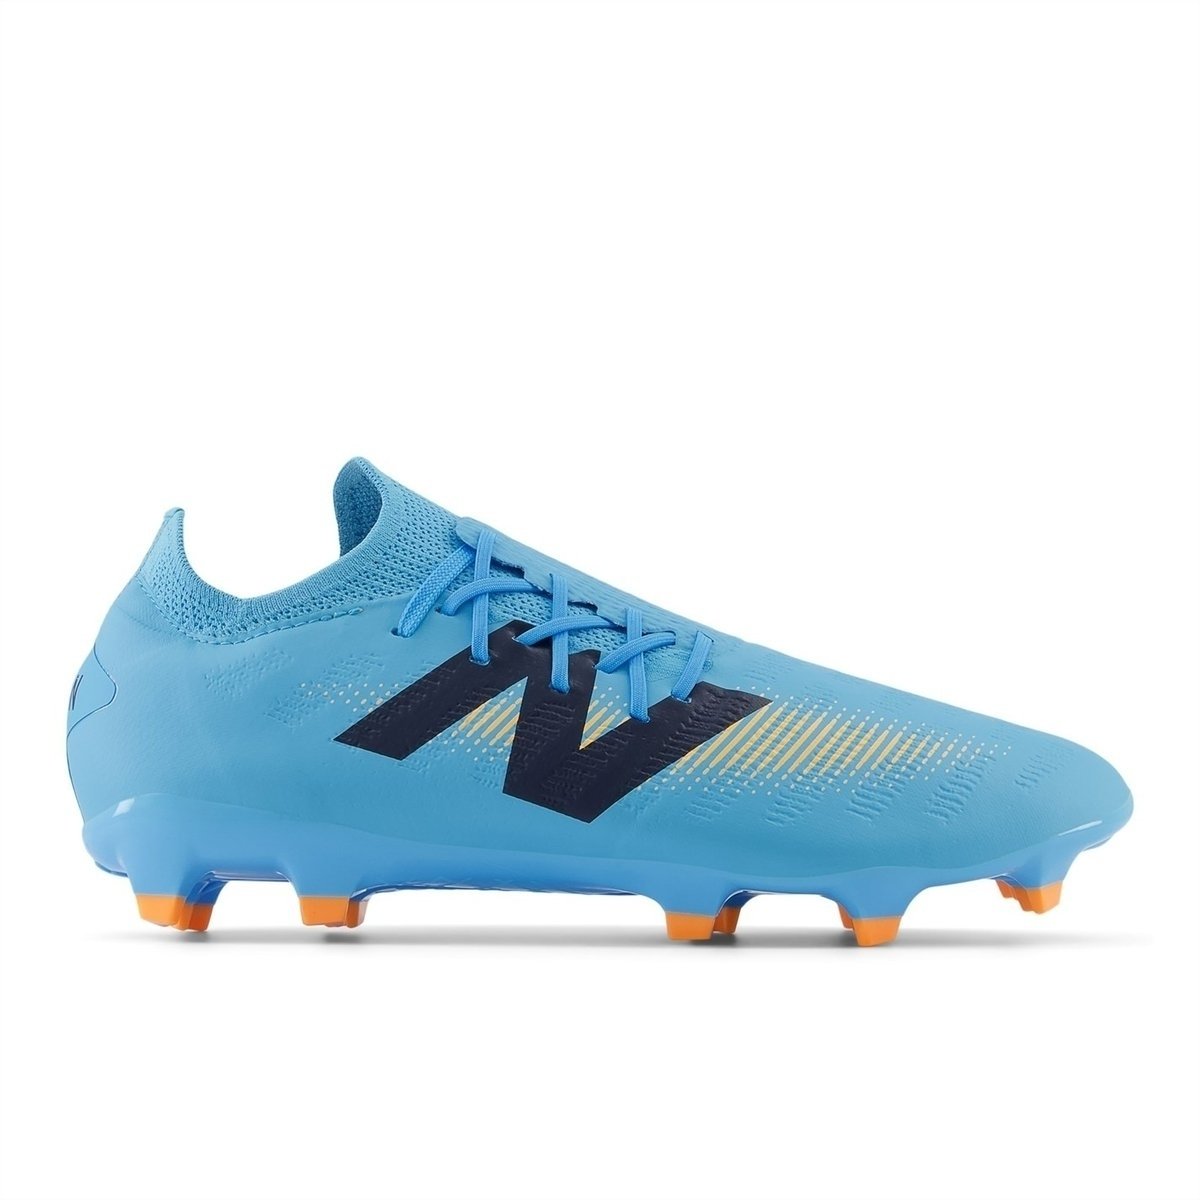 New Balance Rugby Boots - Lovell Rugby